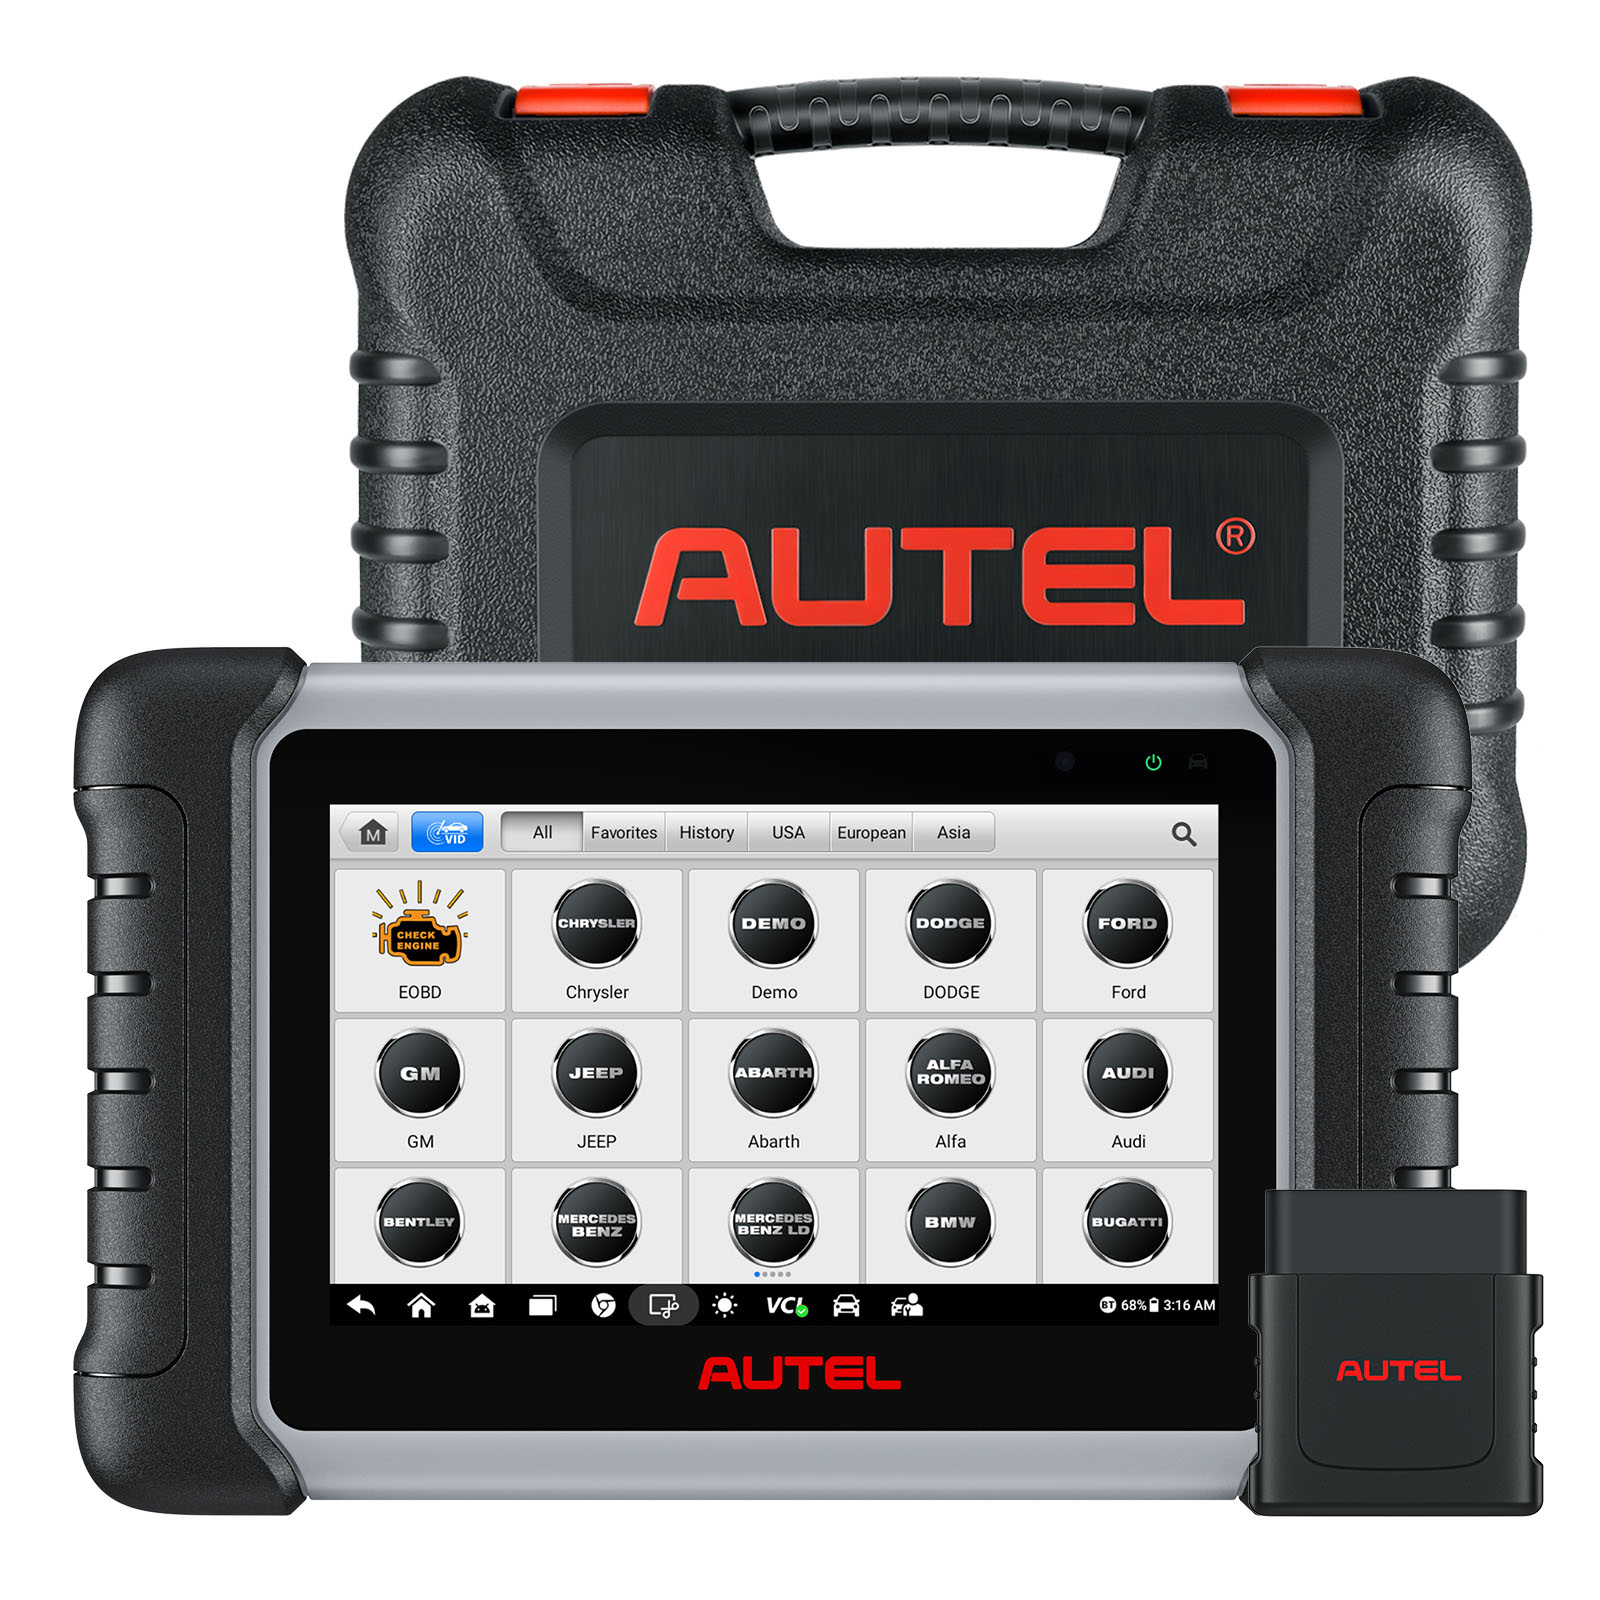 2024 Autel MaxiCOM MK808 MK808S Full System Diagnostic Tablet Newly Adds  AutoAuth for FCA SGW and Active Test